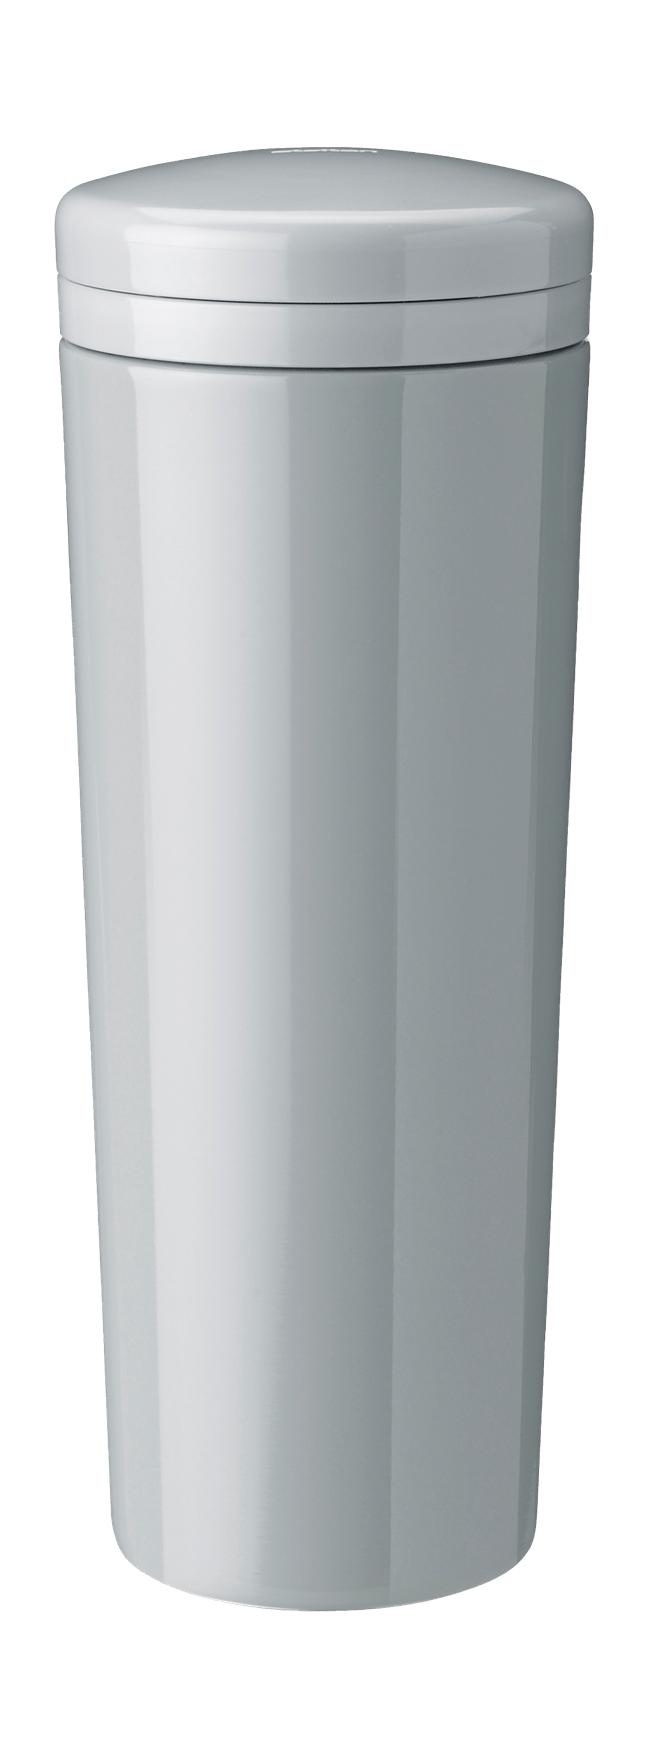 Stelton Carrie Thermos Bottle 0,5 L, lysegrå